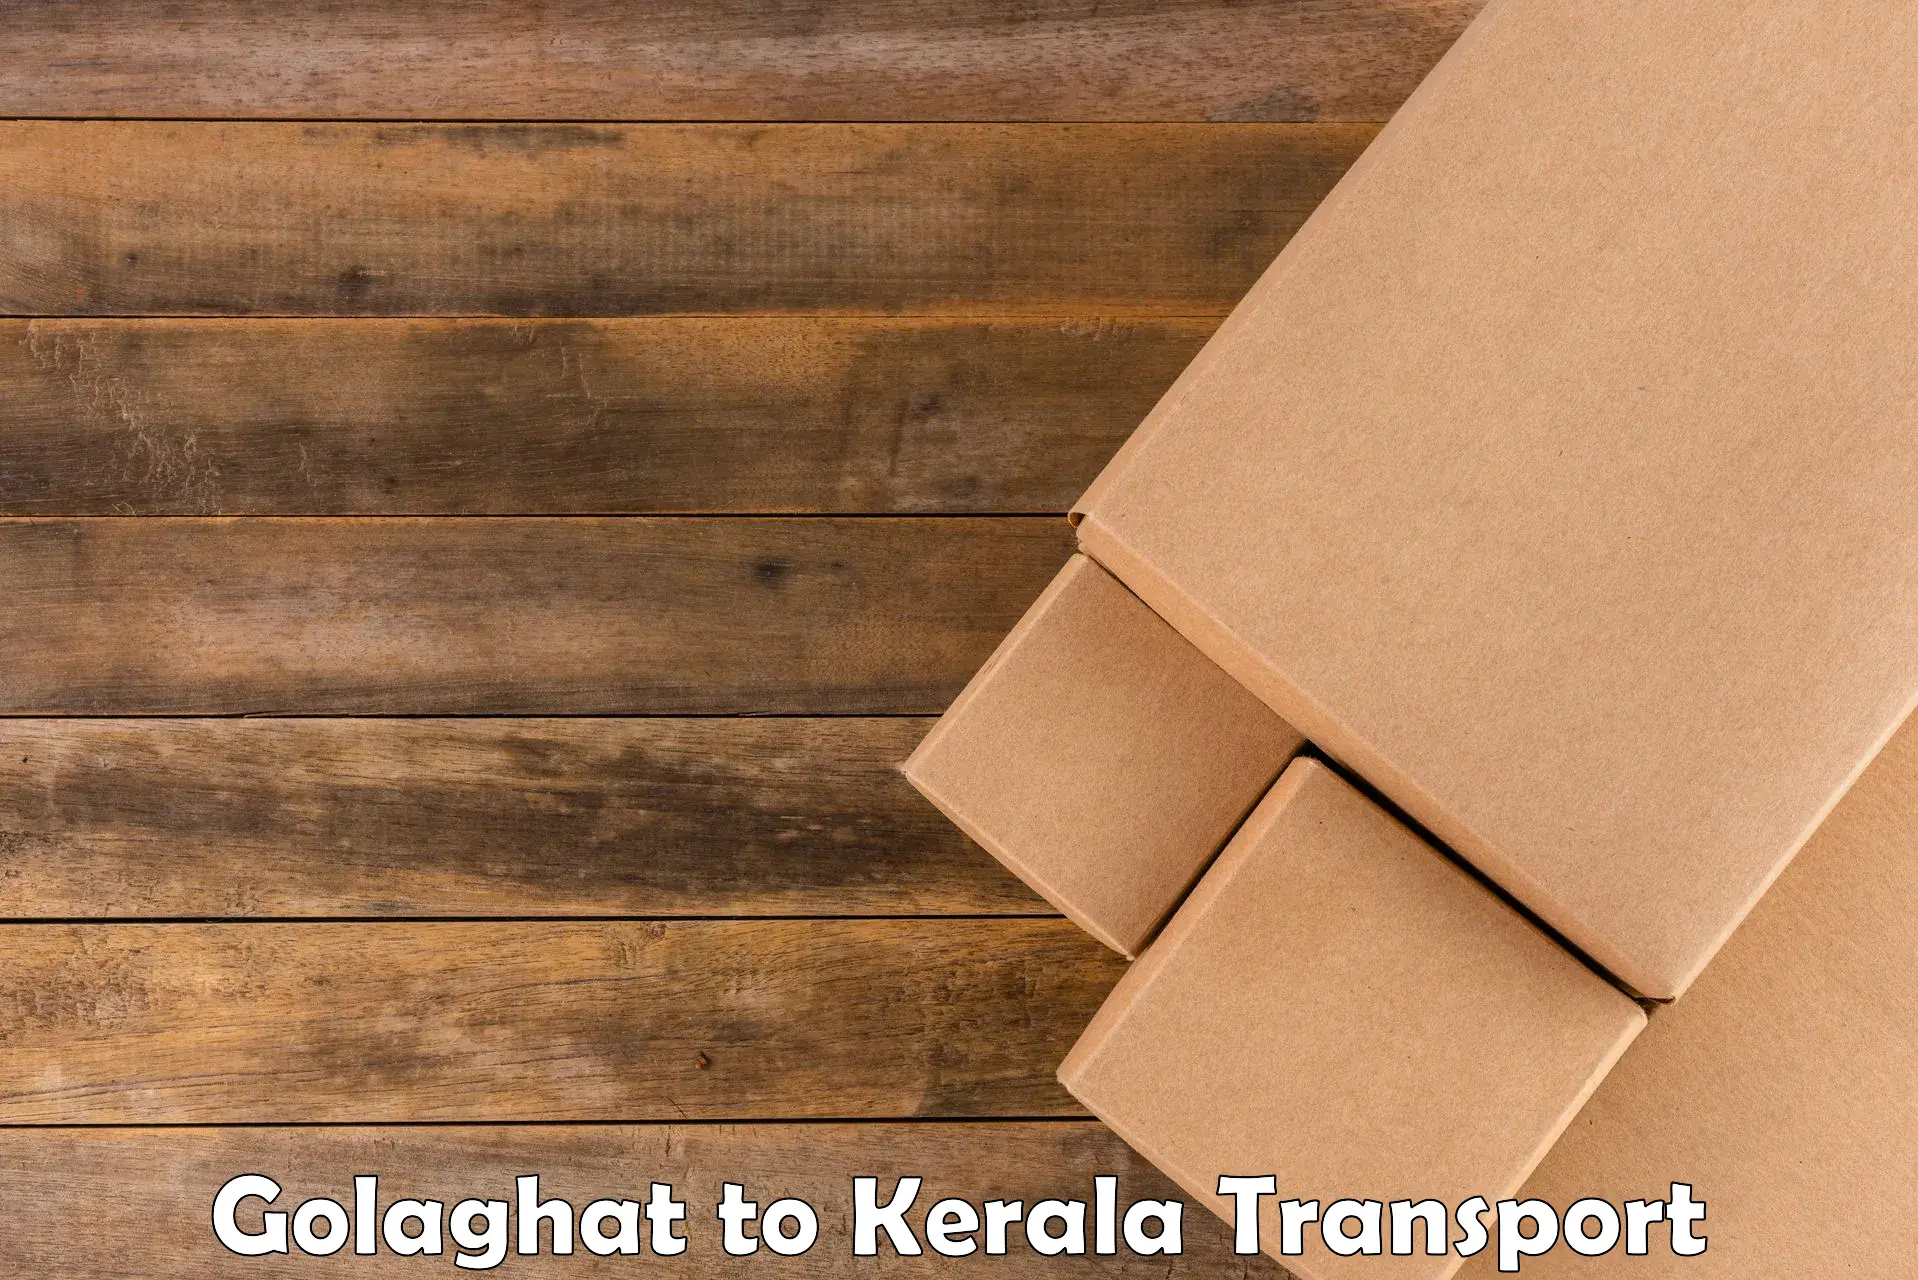 Nearby transport service Golaghat to Alathur Malabar